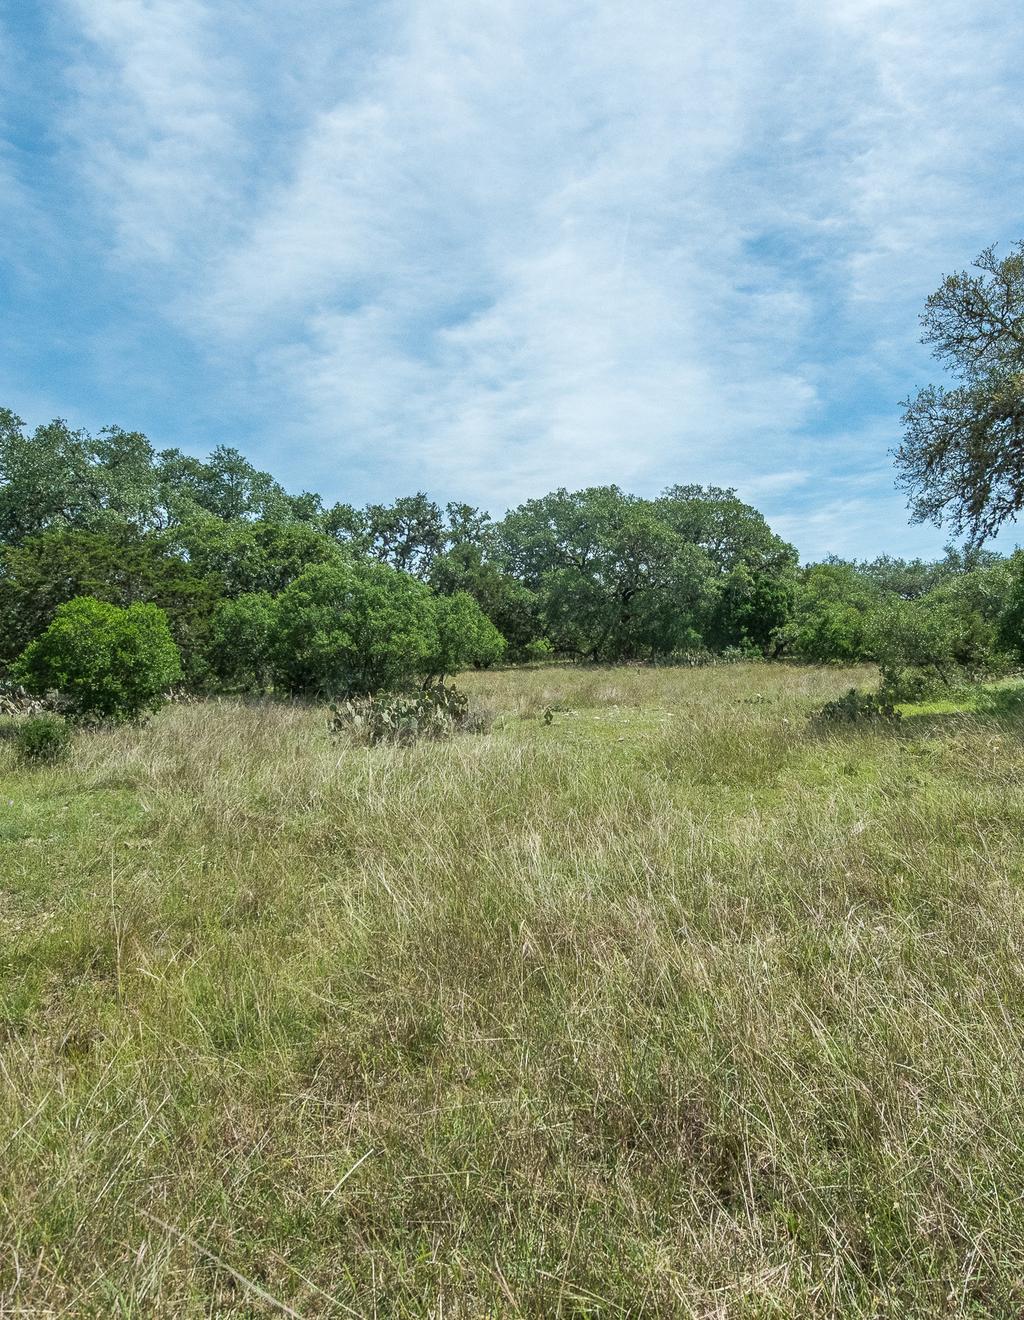 Oak HAven Ranch Located 15 miles north of Hondo and less than an hour from San Antonio. A custom 2,614± sq ft white rock home with two master suites has an open floor plan and loft.